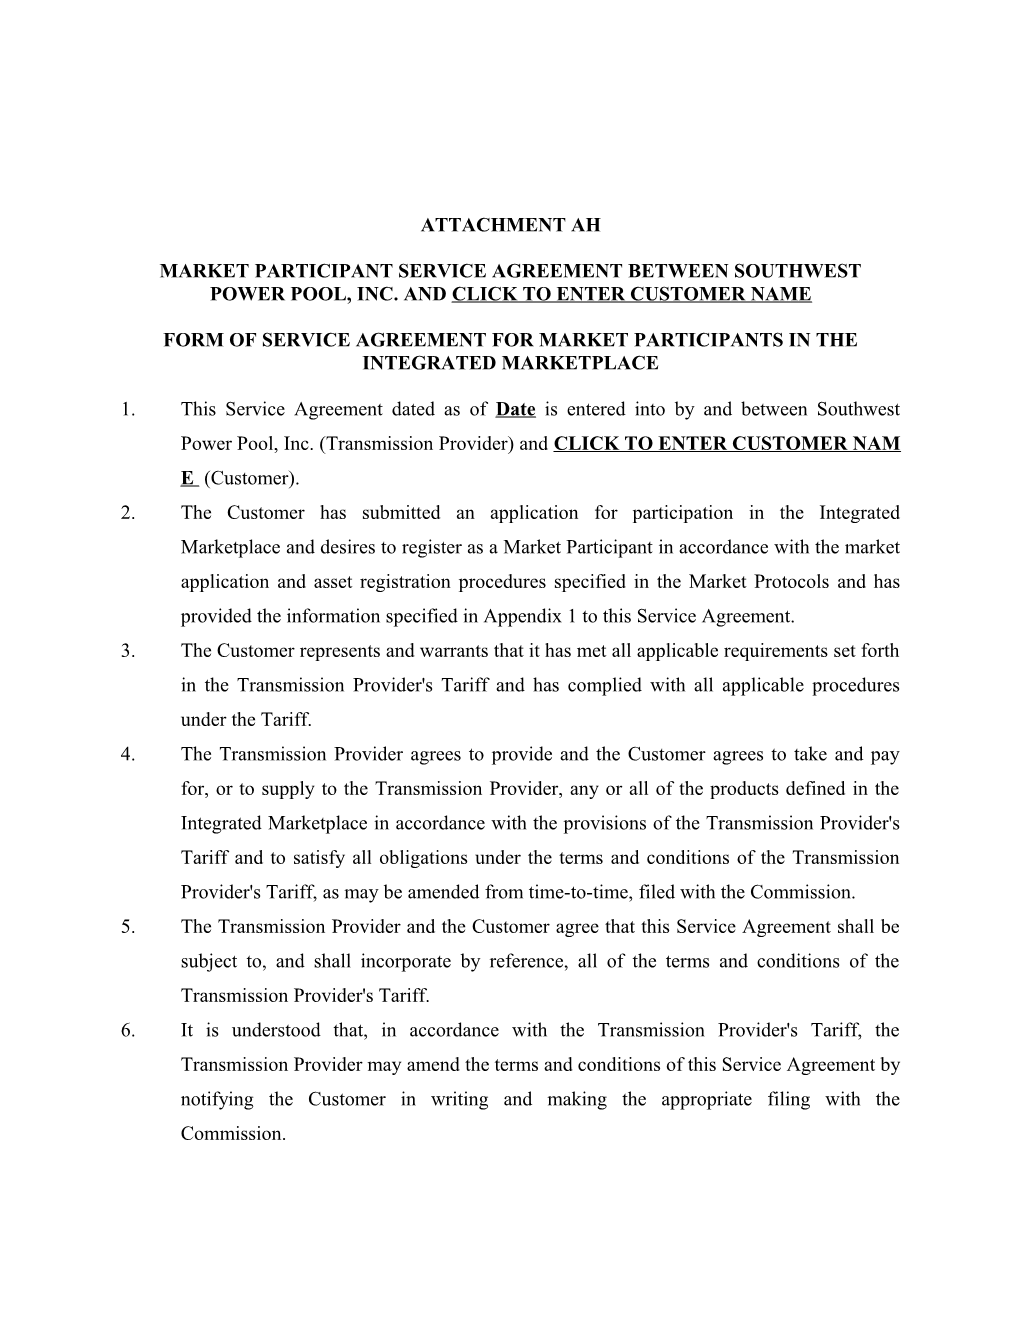 Form of Service Agreement for Market Participants in the Integrated Marketplace